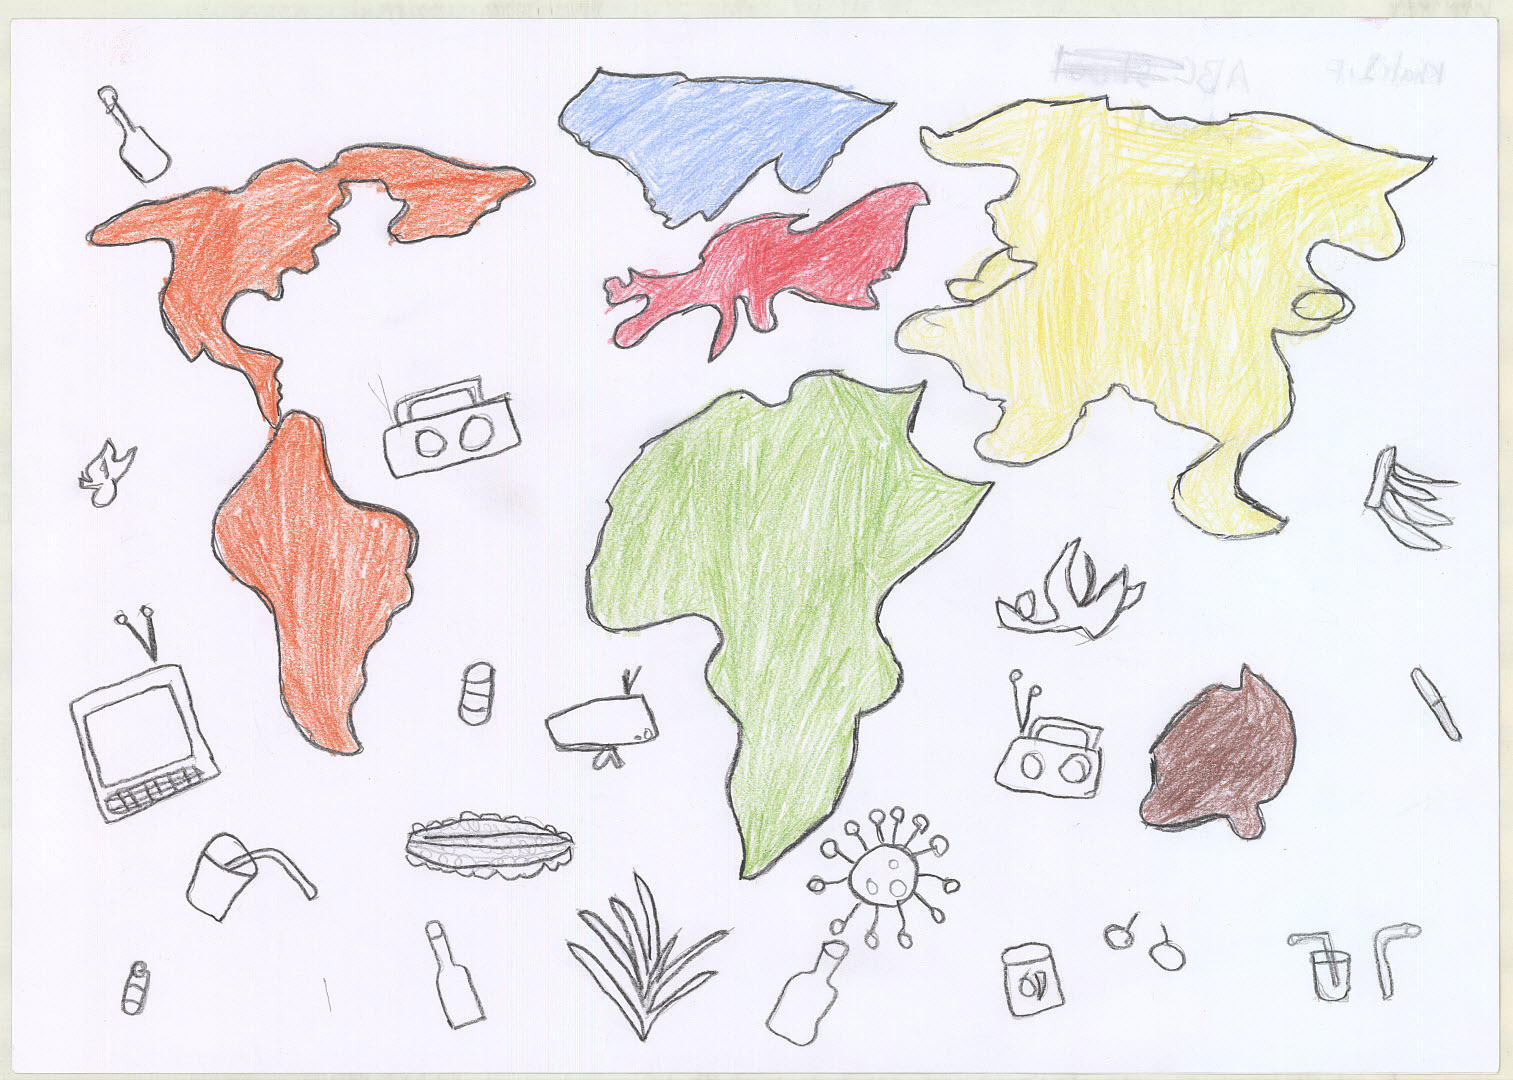 Show a map of the World that needs food, technology, environment